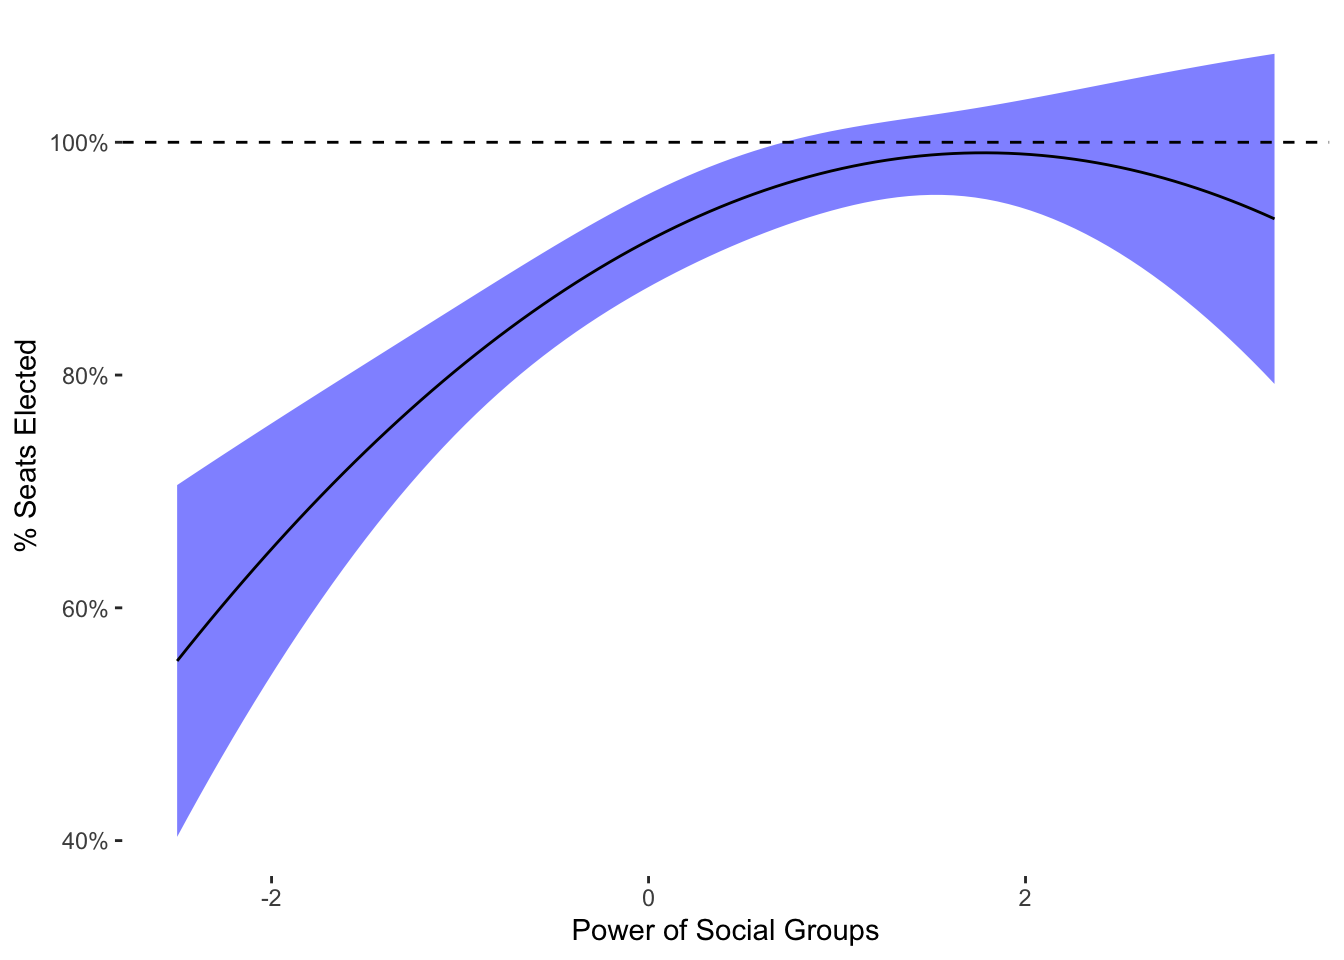 OLS Predicted Values of Elected Lower Chamber Seats Given Power of Social Groups